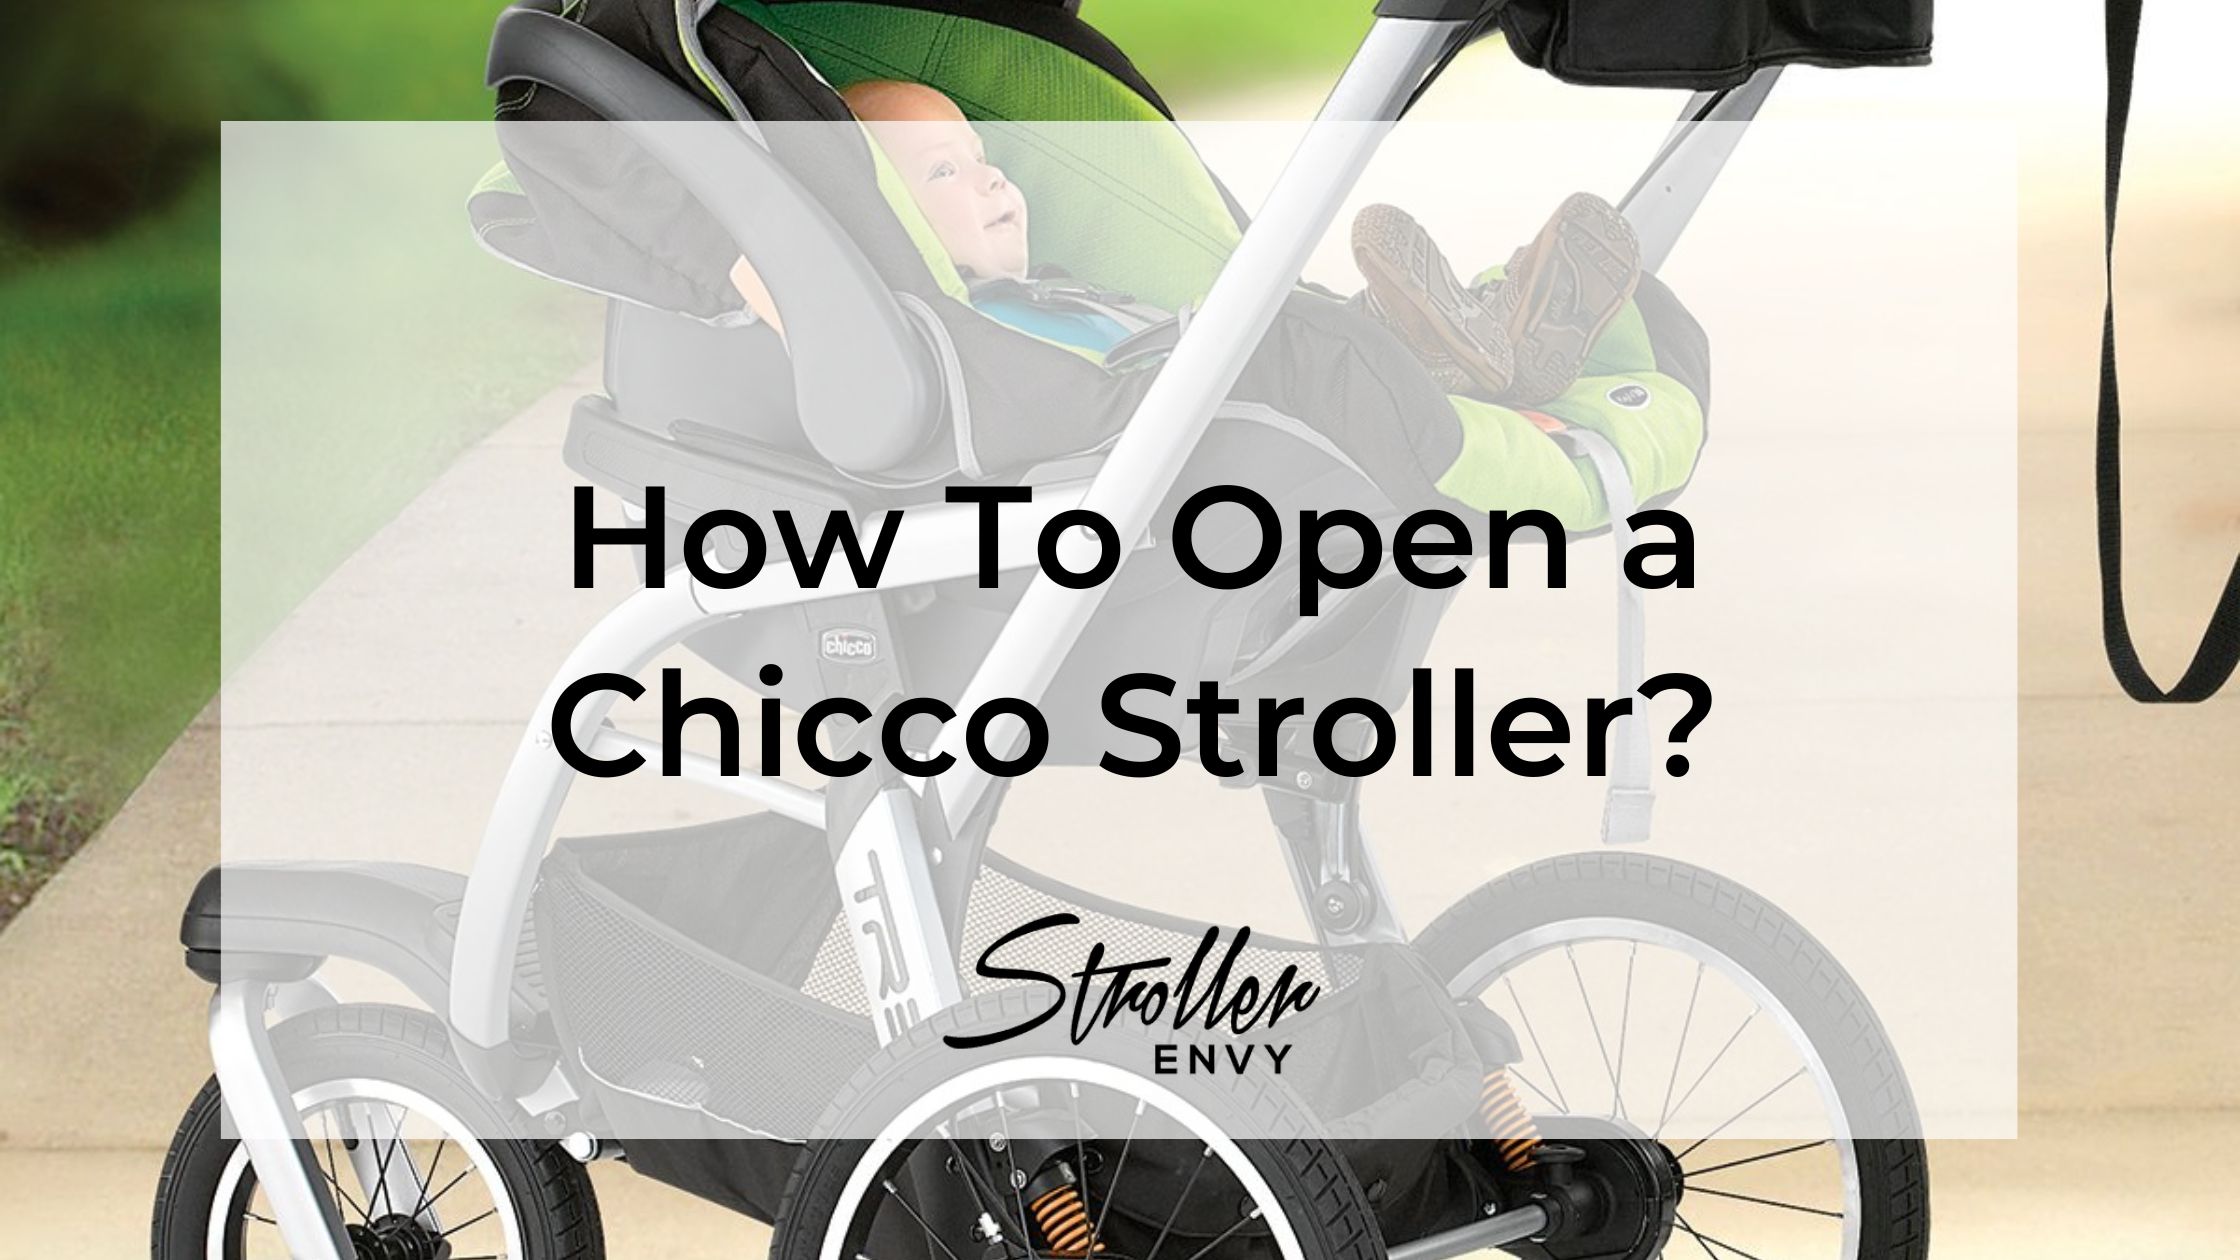 How To Open a Chicco Stroller?